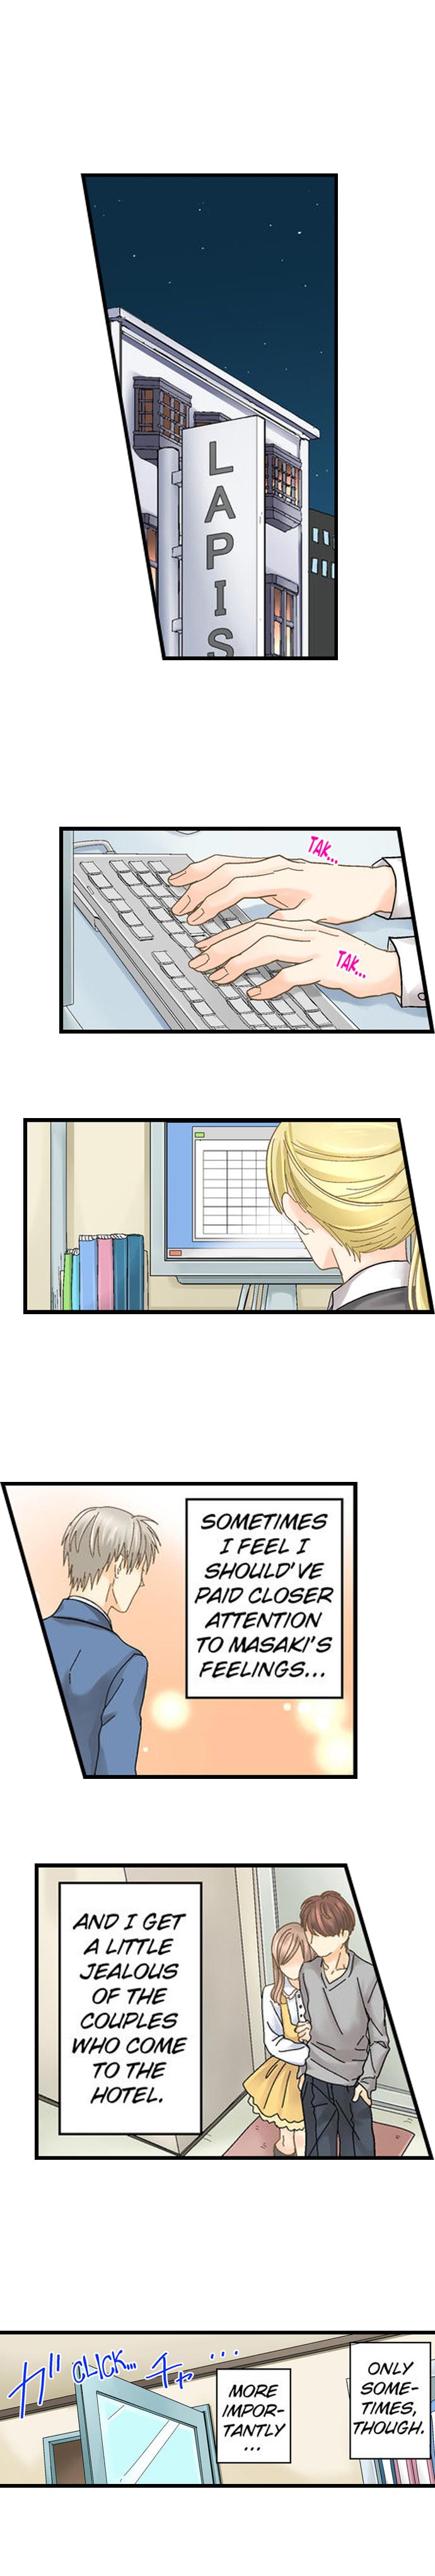 Running a Love Hotel with My Math Teacher - Chapter 46 Page 3